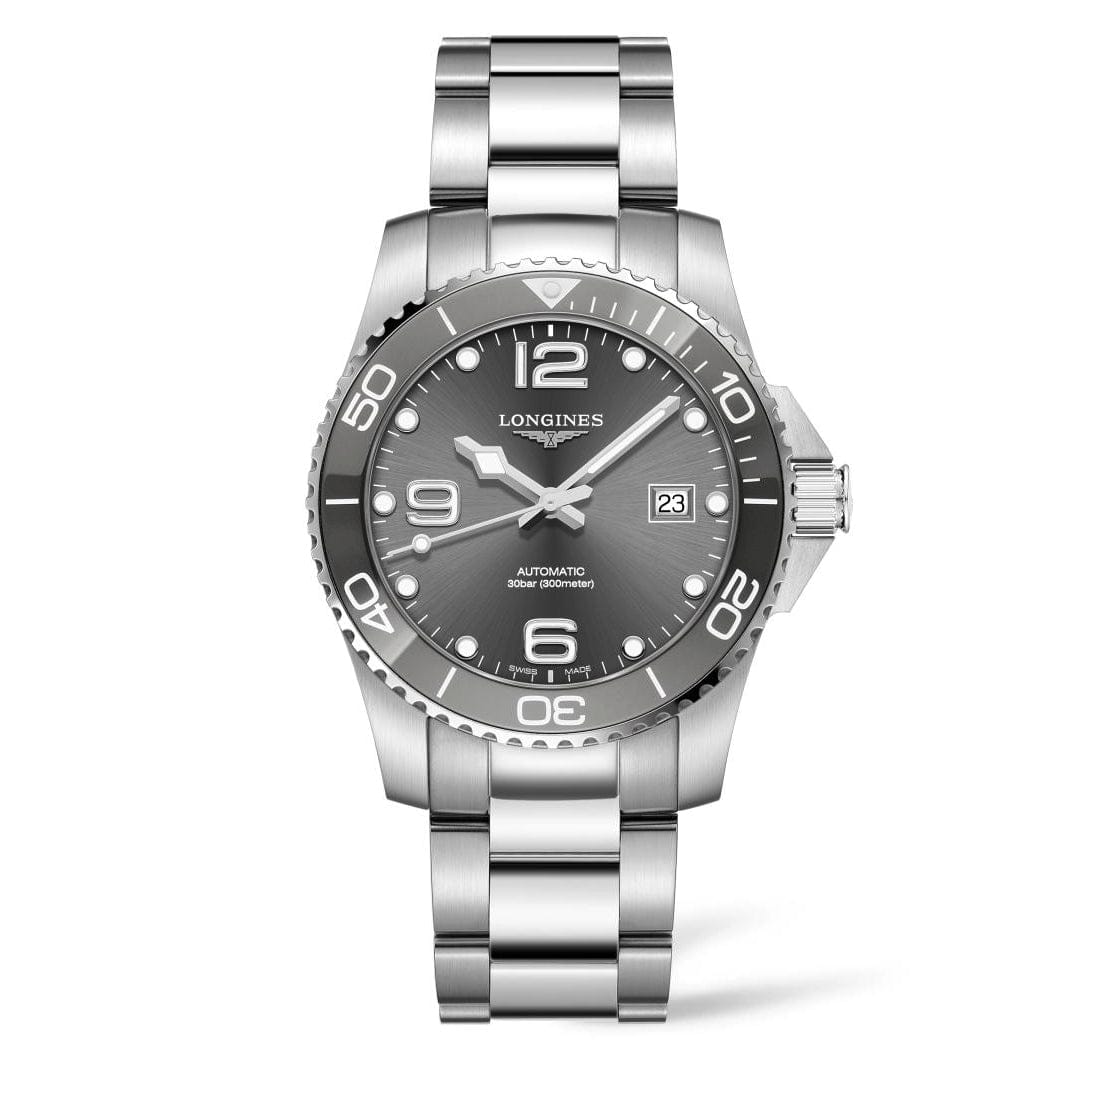 HydroConquest 41mm Stainless Steel/Ceramic Automatic, Long's Jewelers